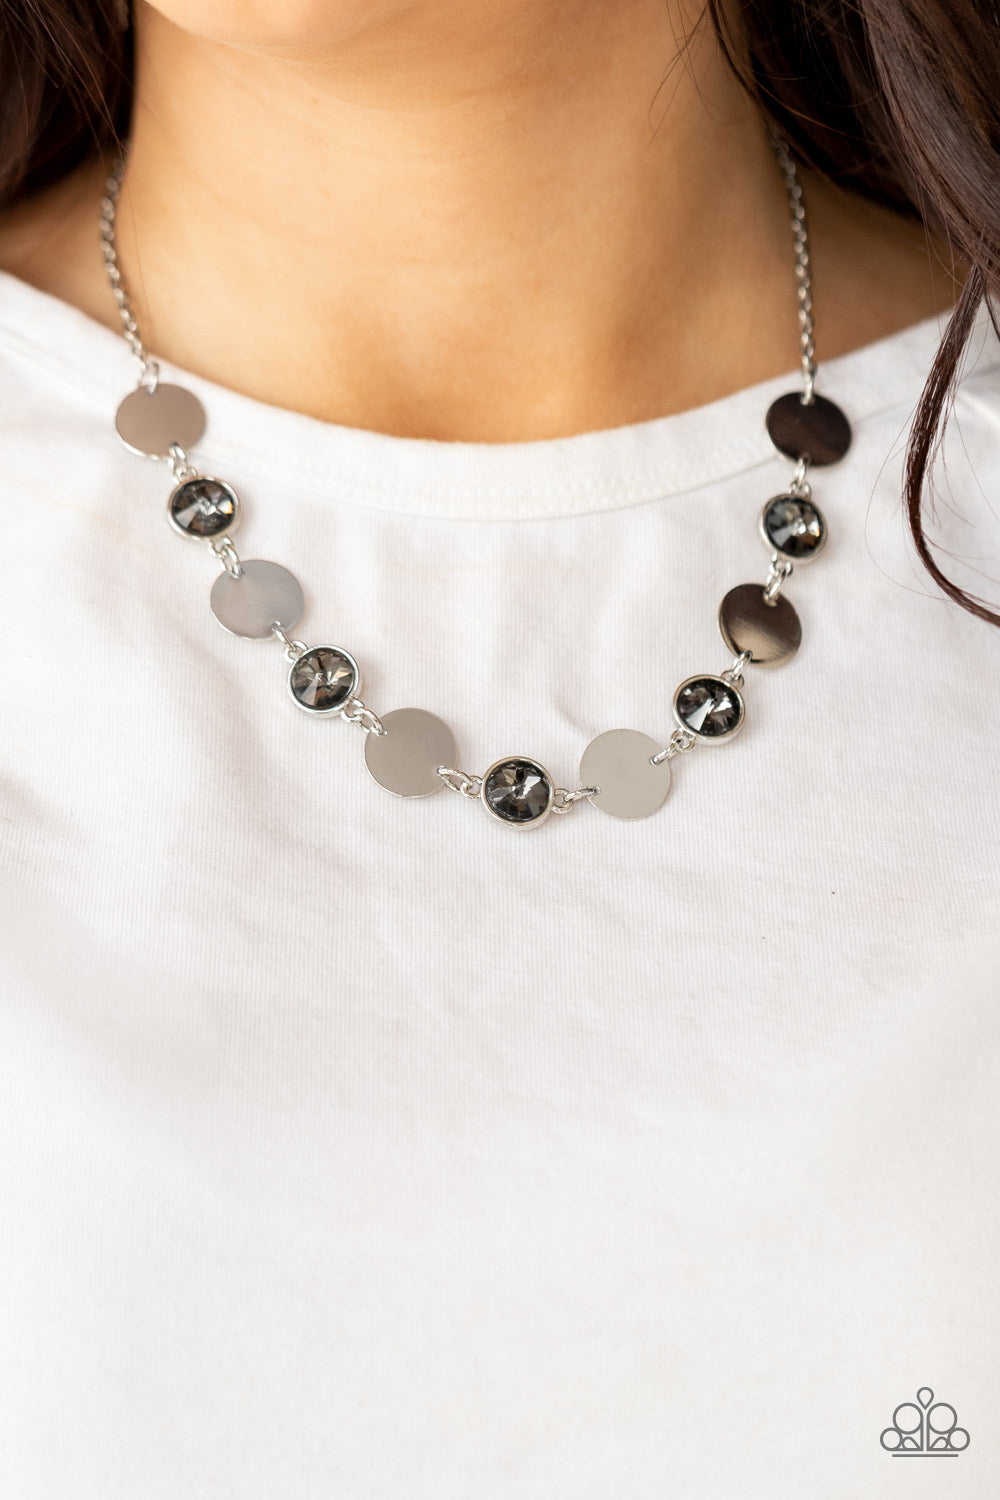 Refined Reflections - Silver Paparazzi Necklace